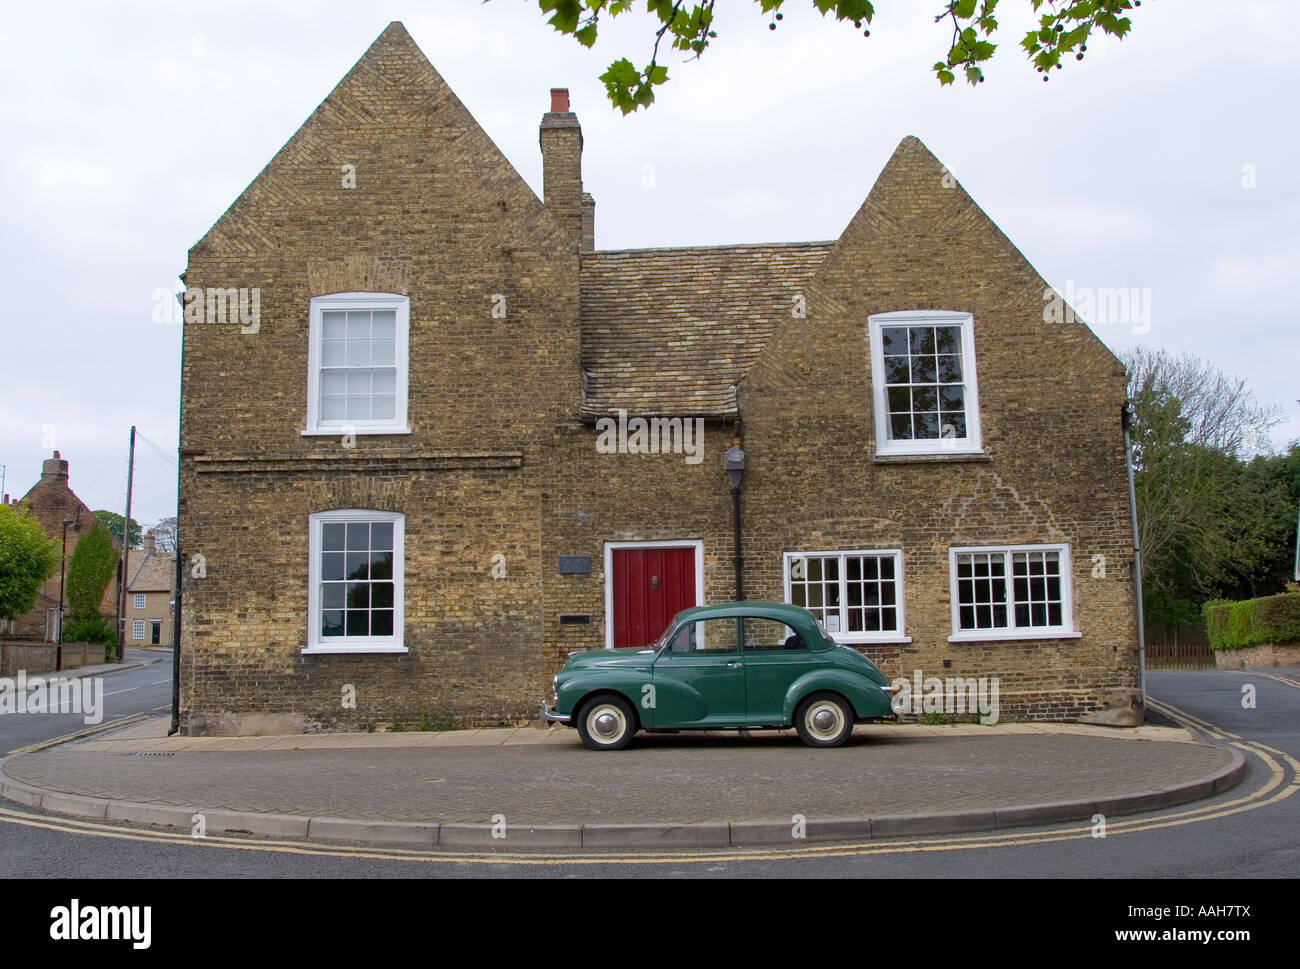 Morris minor parked in front of a house Ely England Stock Photo